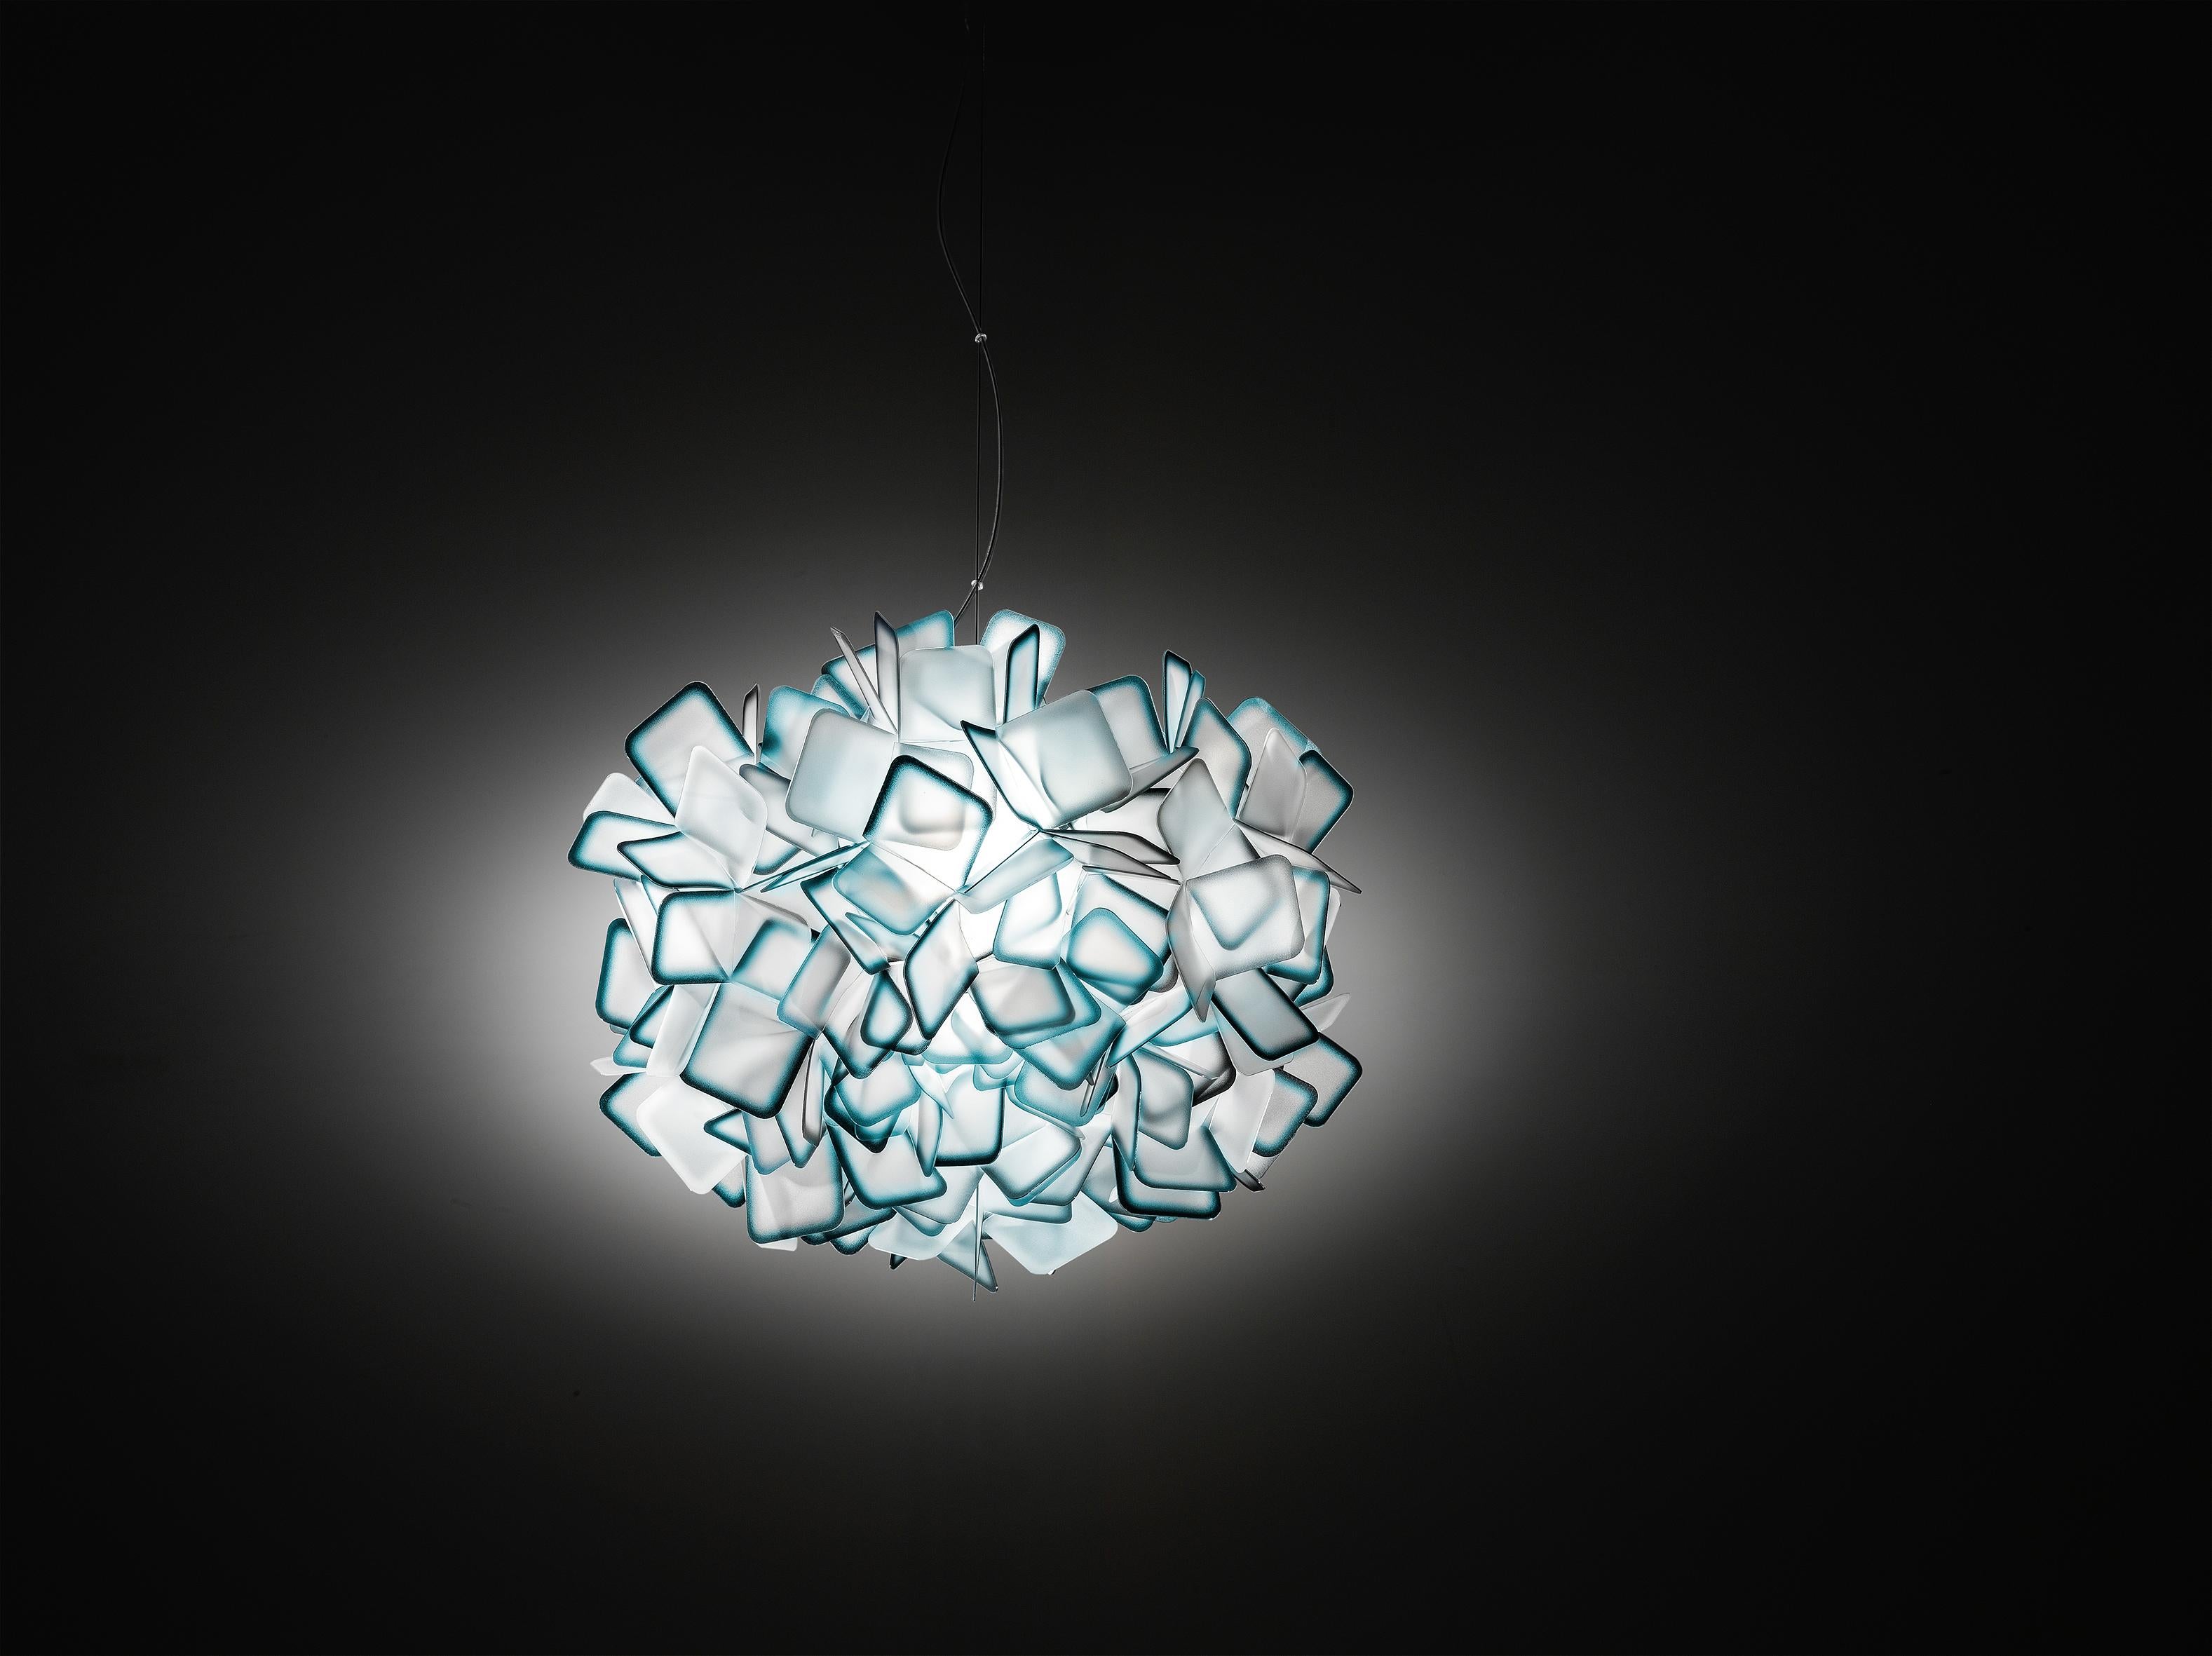 Clizia is a series of shapes fit together to create a perfect balance of reflections and transparencies. The lamp has taken note of natural forms, resembling a cloud that captures the first changing rays of morning sun, or a treetop filtering a play